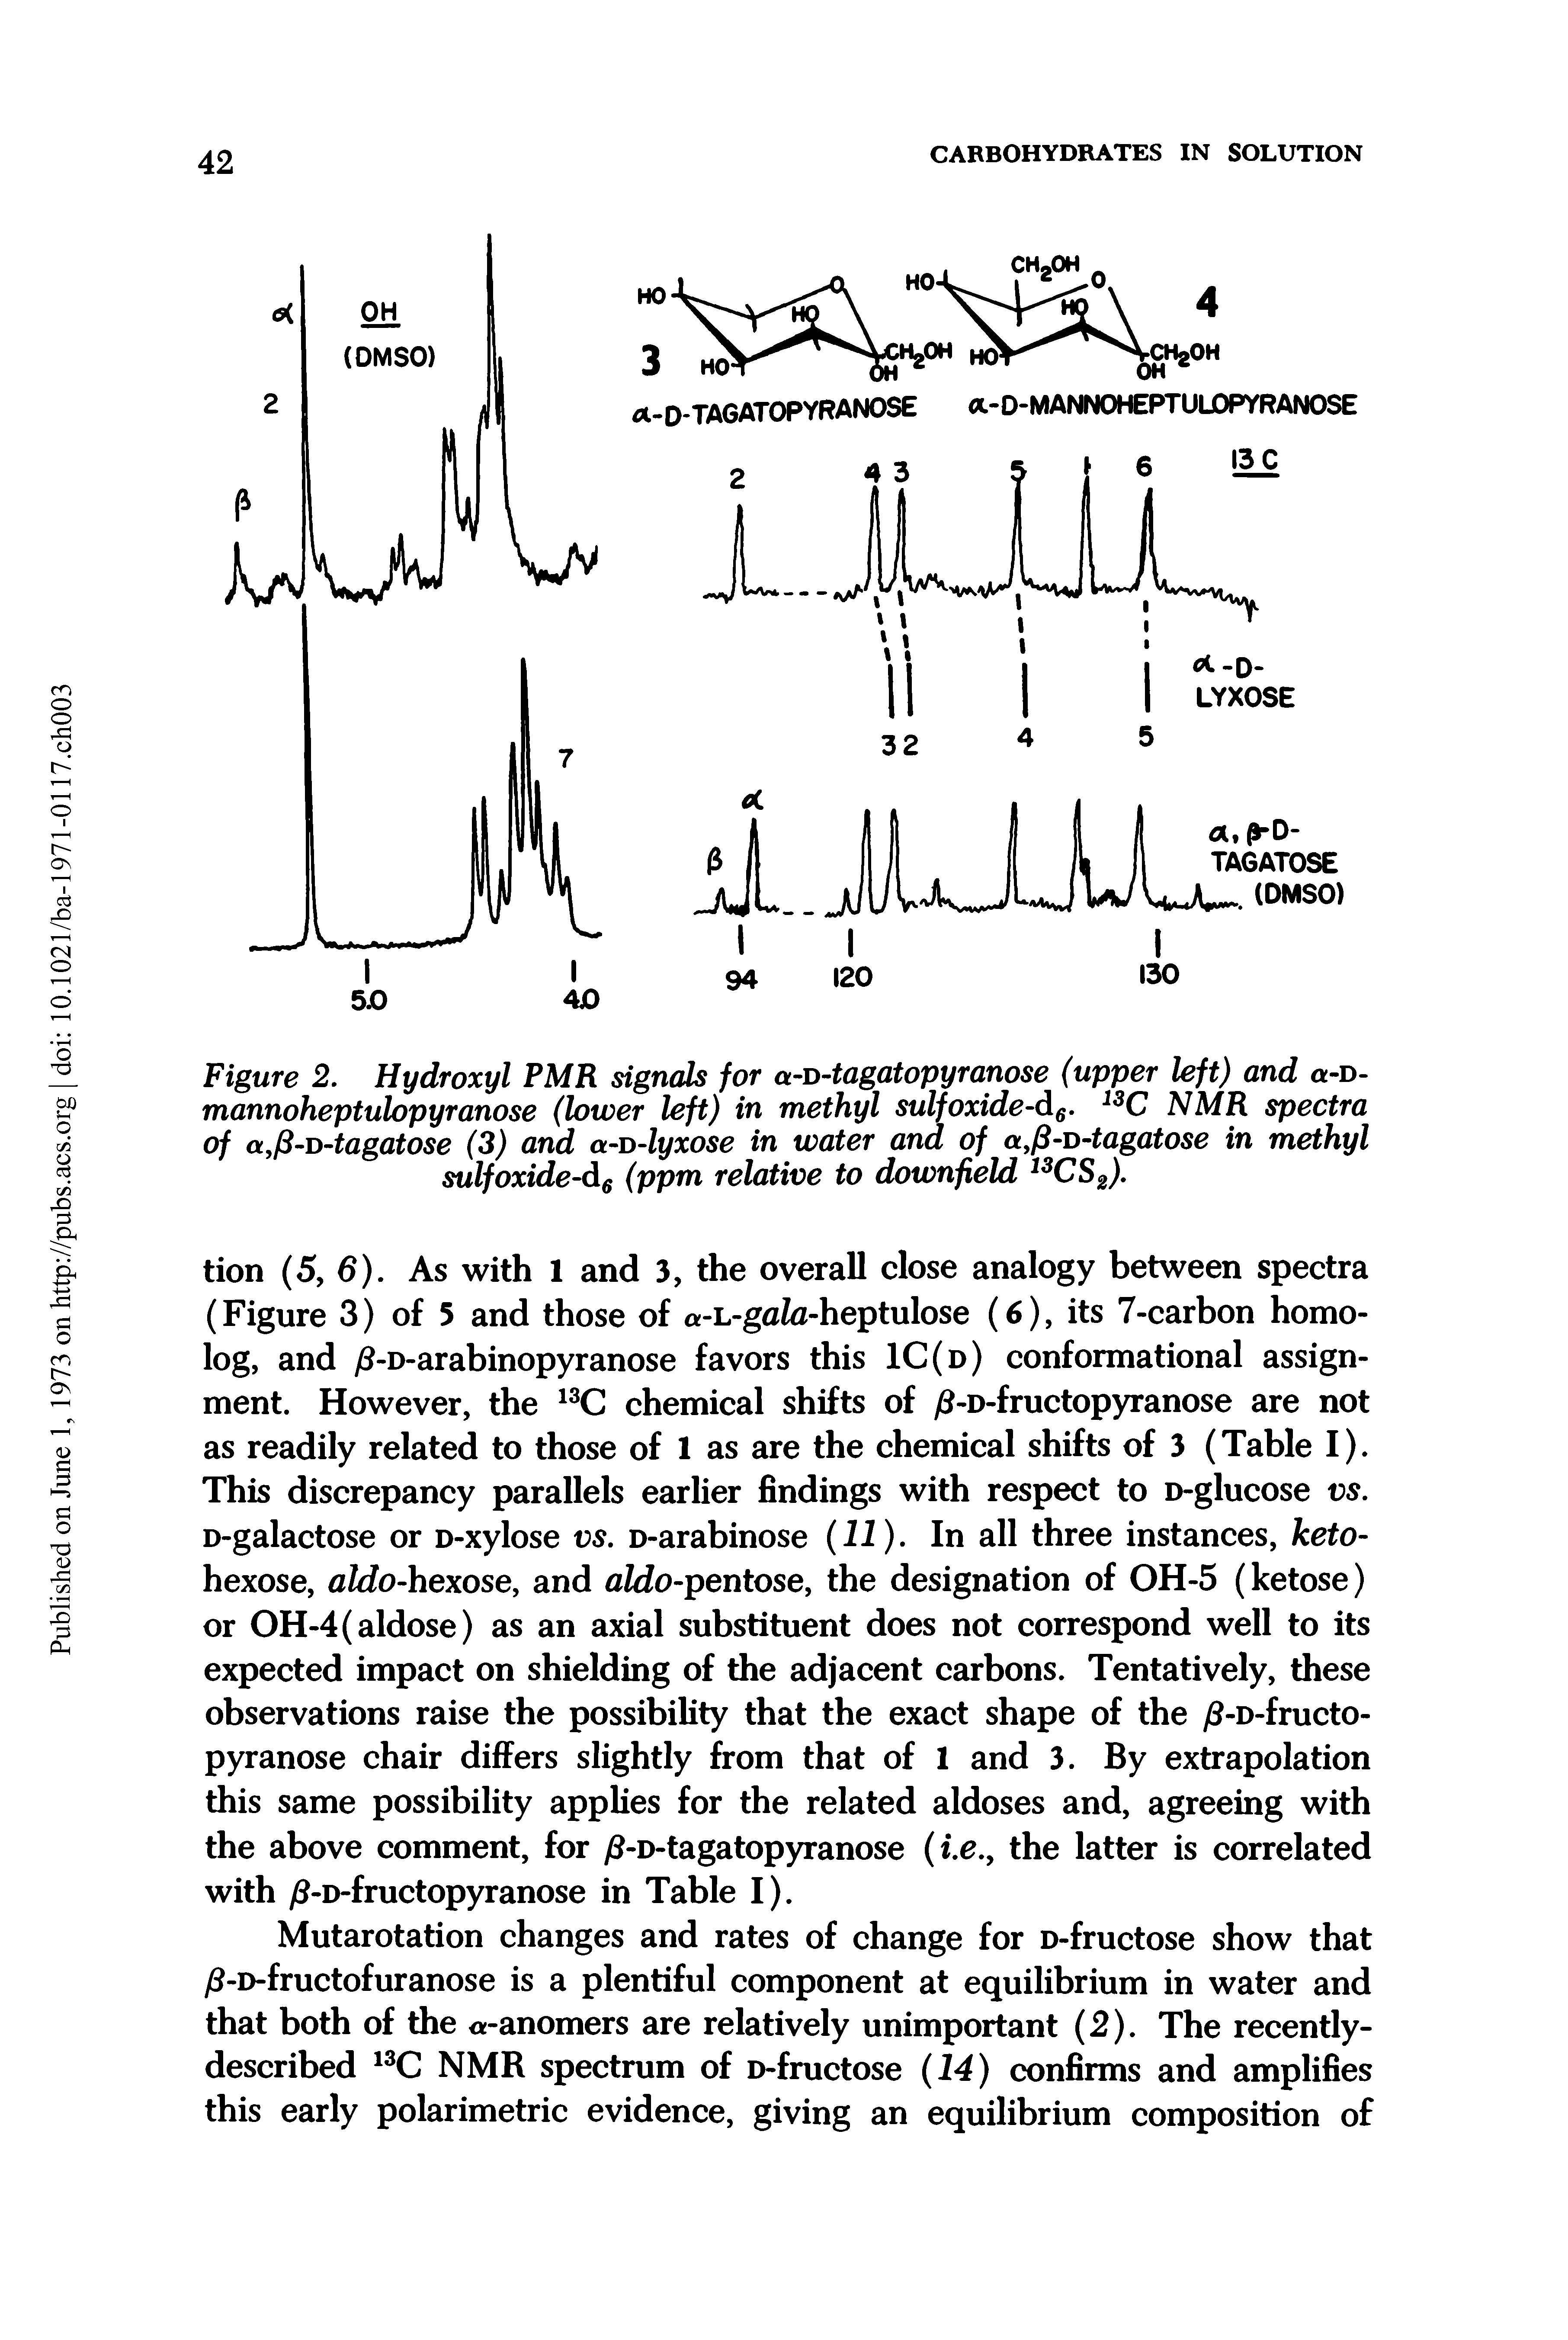 Figure 2. Hydroxyl PMR signals for a-D-tagatopyranose (upper left) and a-D-mannoheptulopyranose (lower left) in methyl sulfoxide-d6. 13C NMR spectra of a,fi-D-tagatose (3) and a-D-lyxose in water and of a,/ -D-tagatose in methyl sulfoxide-(ppm relative to downfield 13CS2)-...